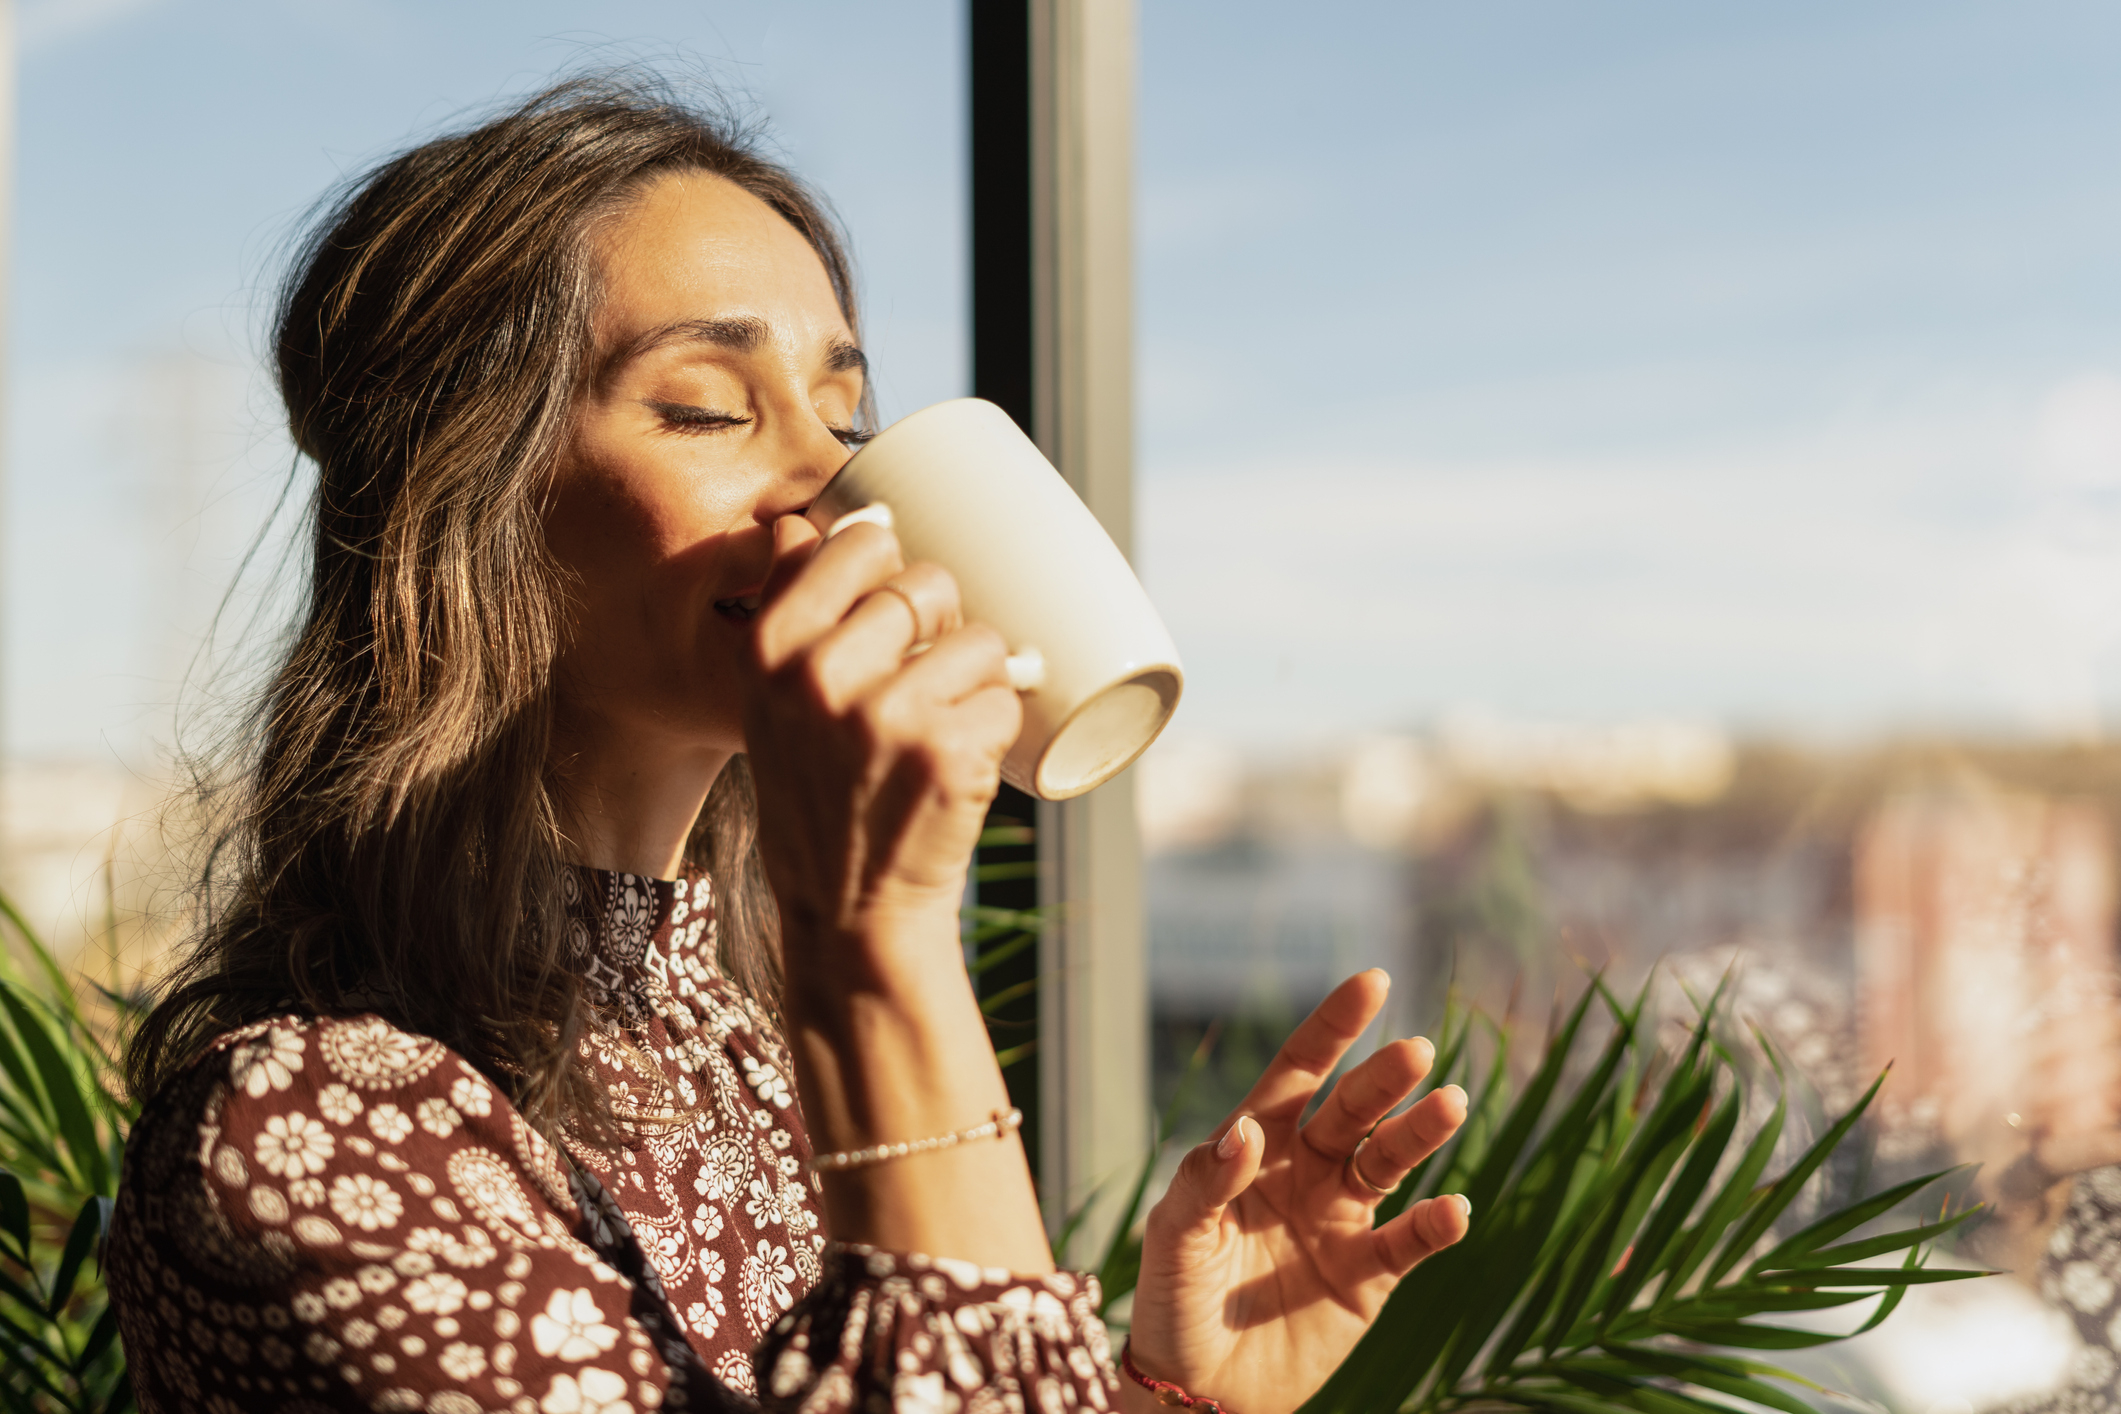 Woman in patterned top sips from a mug by a sunny window